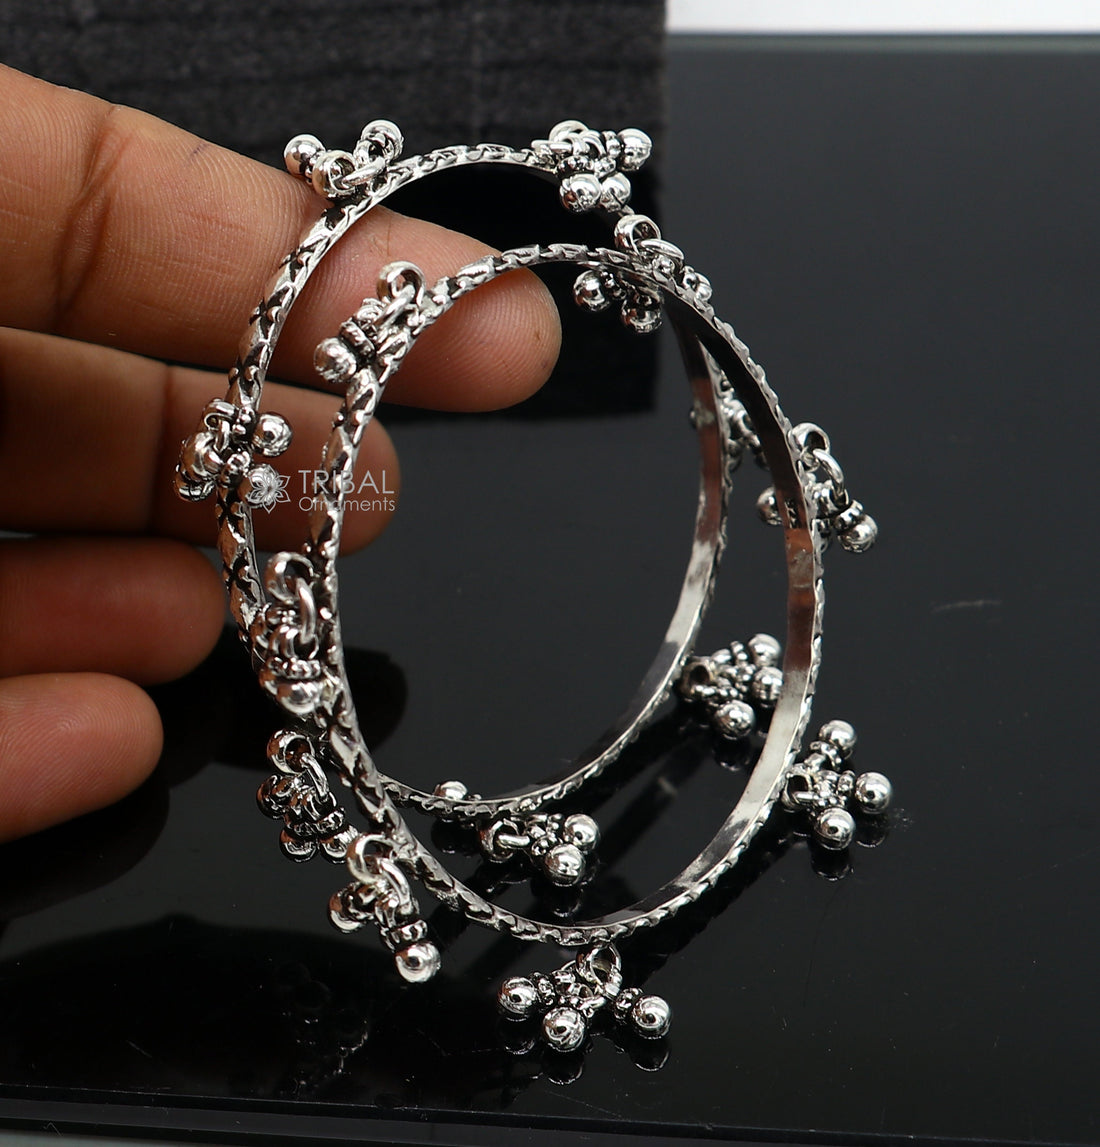 925 sterling silver unique style handmade stylish trendy bangles bracelet , best brides collection wedding NAVRATRI jewelry nba404 - TRIBAL ORNAMENTS